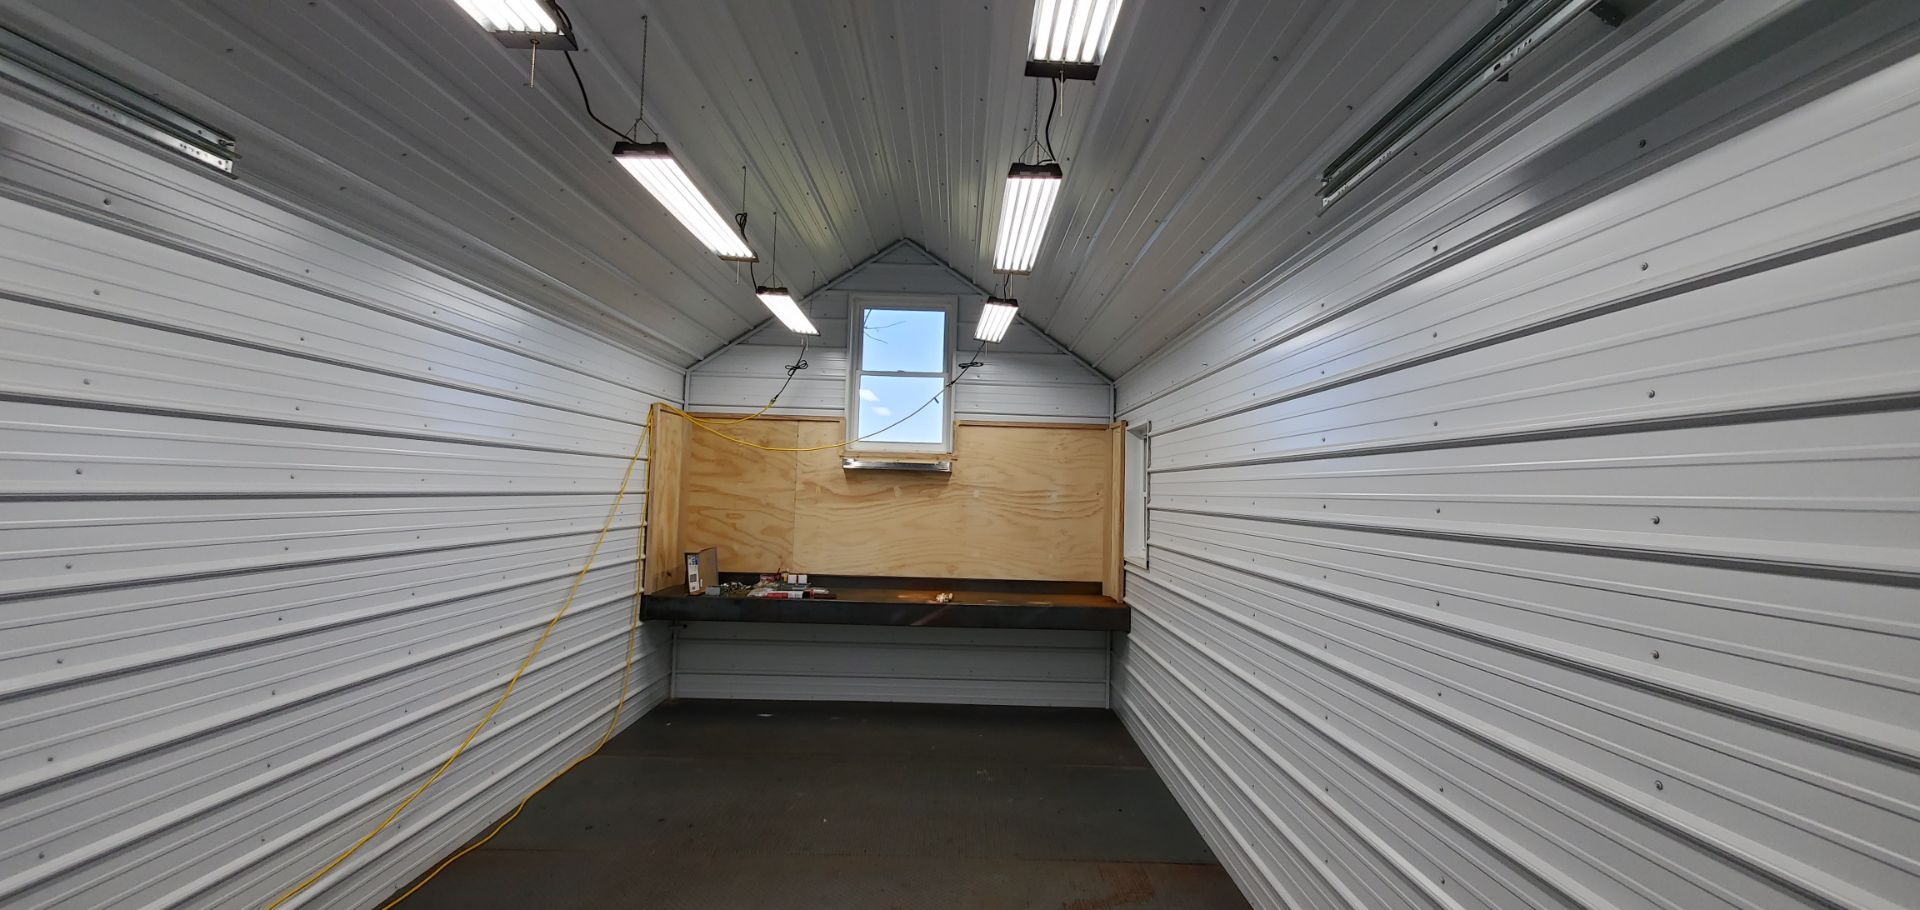 Yoder Portable 12’ x 24’ x 13' 4" High Garage Building, Full 8’ Walls, Like New, Fully Insulated, - Image 5 of 8